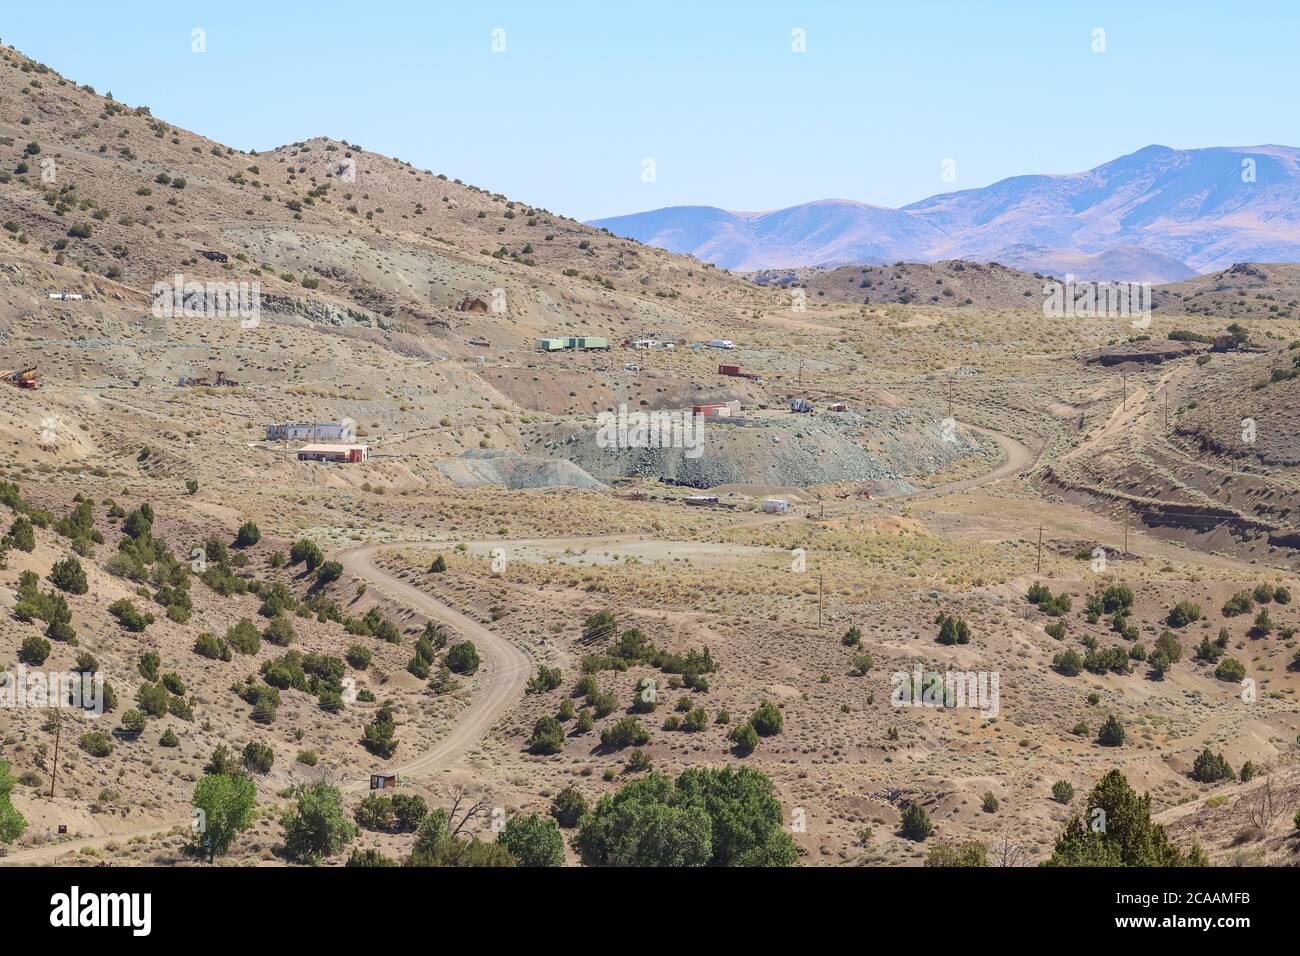 OLINGHOUSE, NEVADA, UNITED STATES - Jul 05, 2020: The town of Olinghouse, Nevada is a ghost town with an active open pit gold mine in Washoe County. Stock Photo